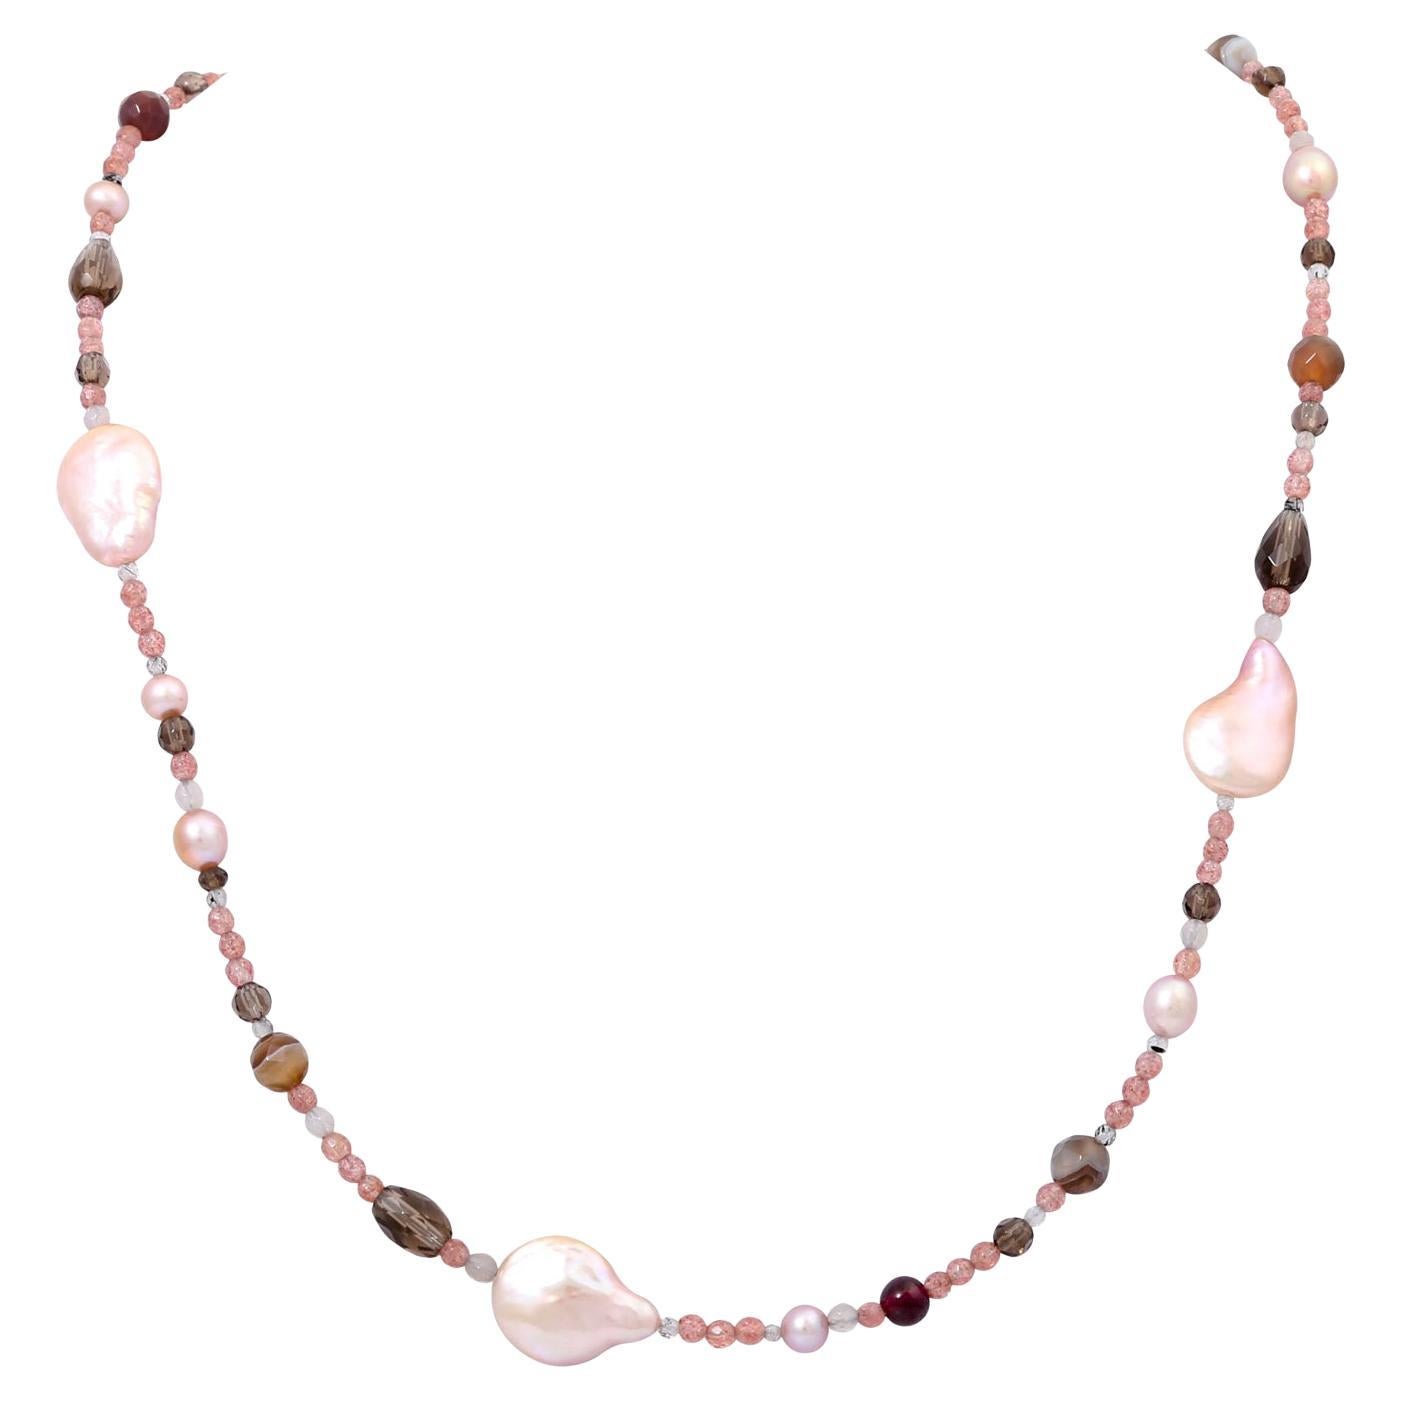 Gemstone necklace with agates For Sale